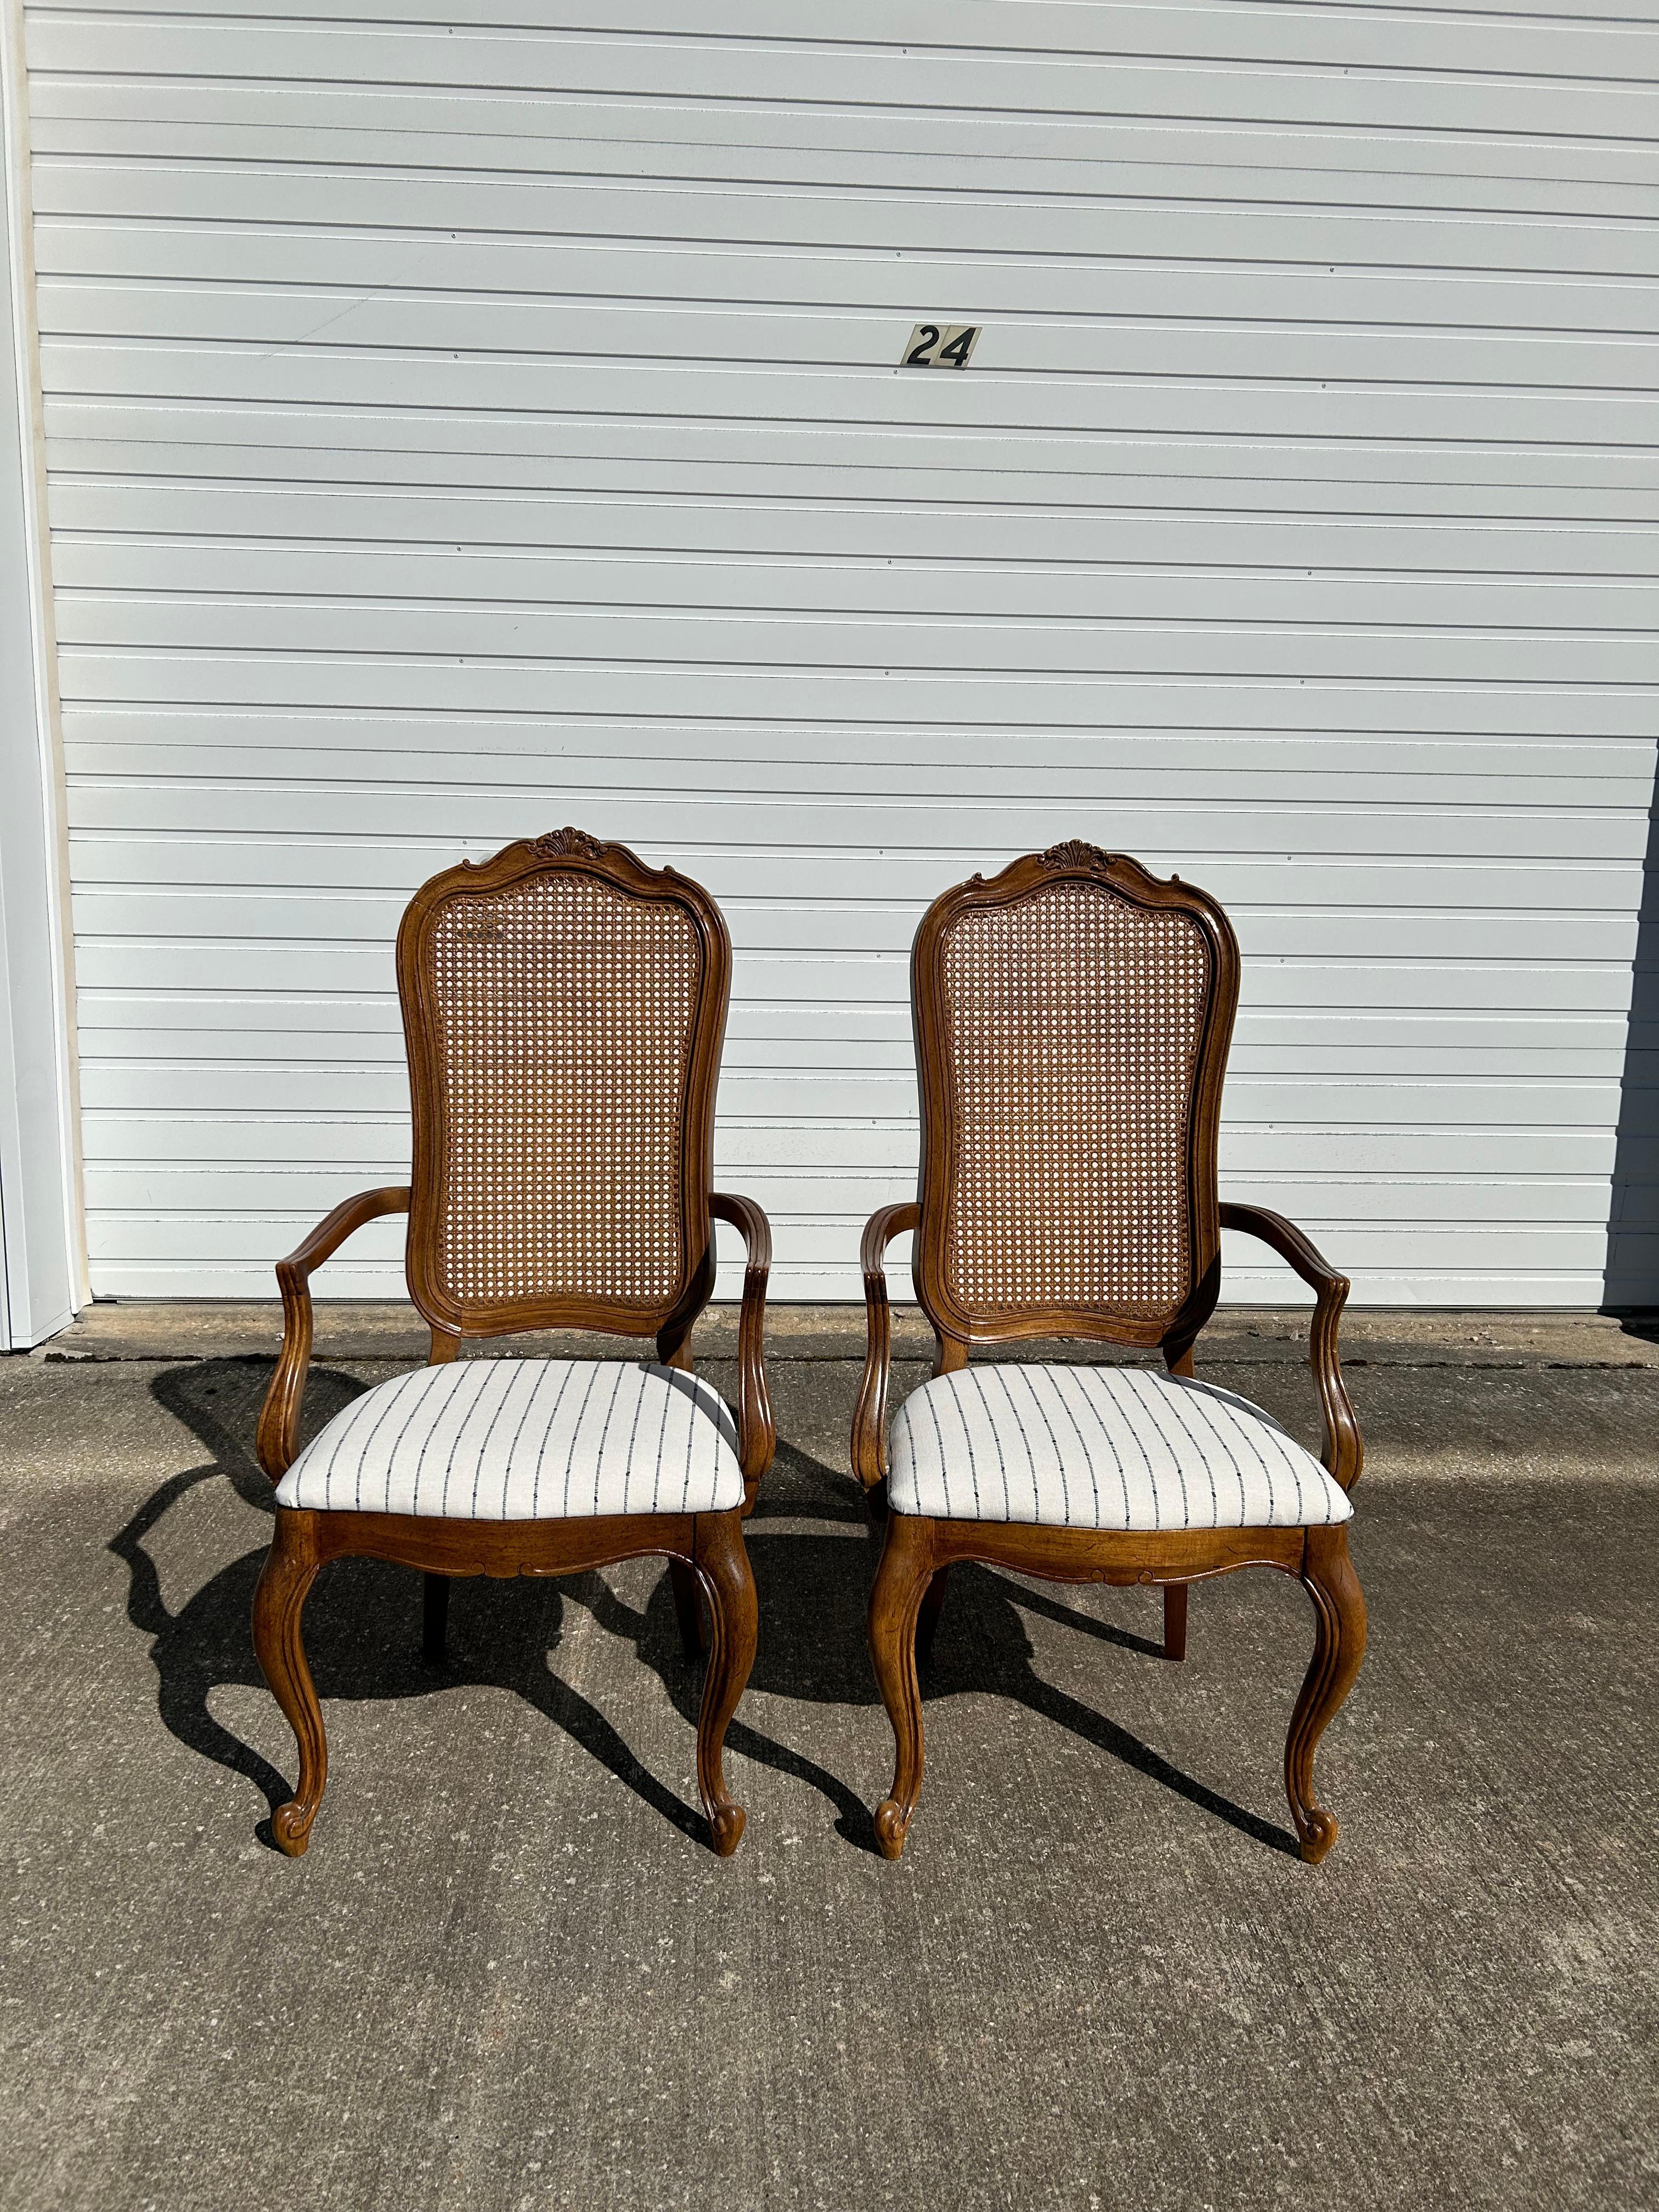 Pair of Thomasville French Provincial Cane Back Dining Arm Chairs. These chairs are in excellent condition, no breaks in the cane and hardly any scratches or gauges in the wood. These chairs have been professionally reupholstered in a beautiful and